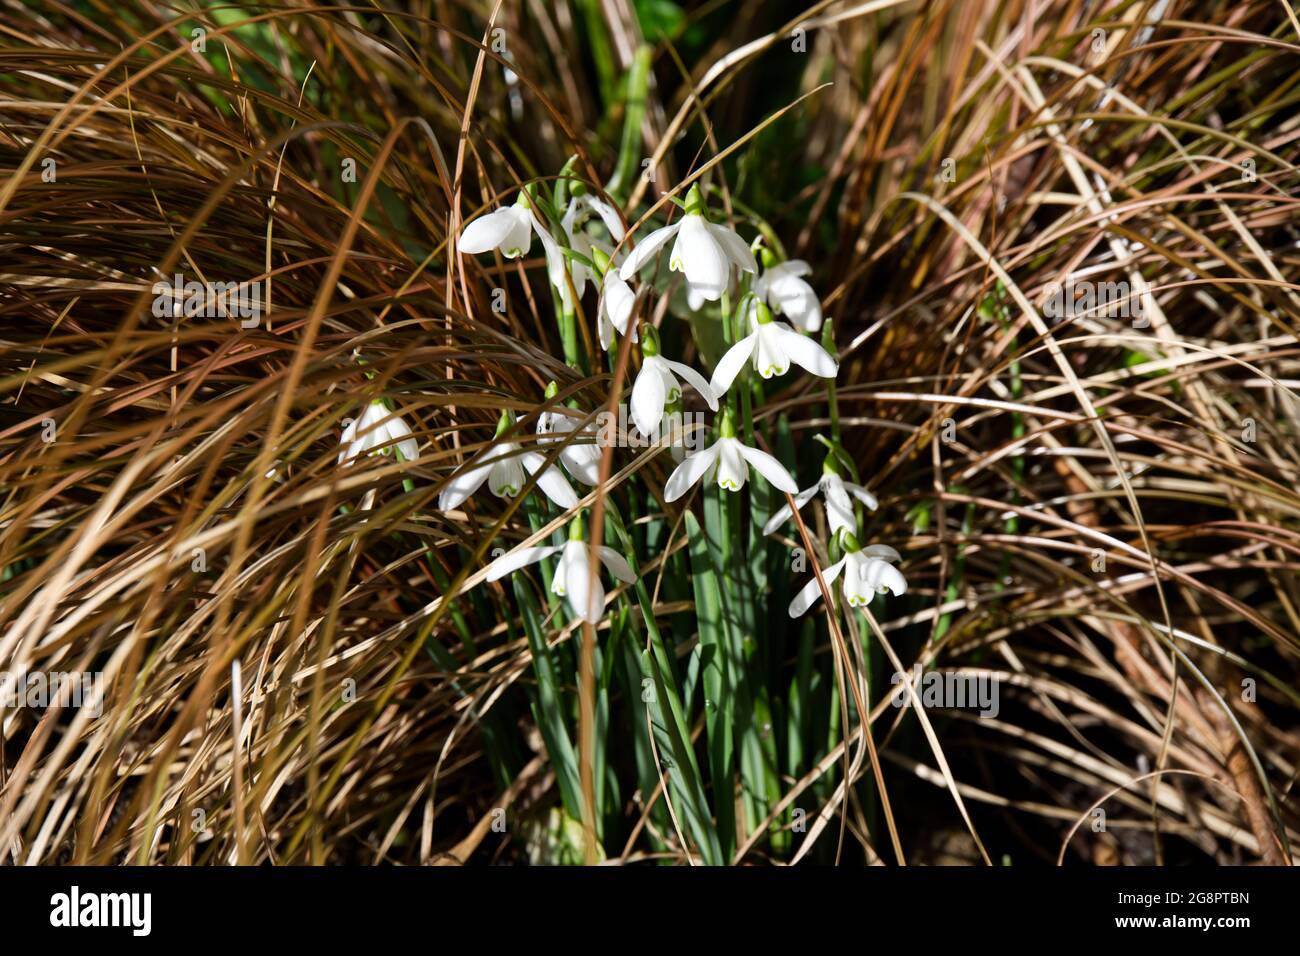 Snowdrops (Galanthus nivalis) surrounded by bronze grass (carex) in a winter garden February UK Stock Photo